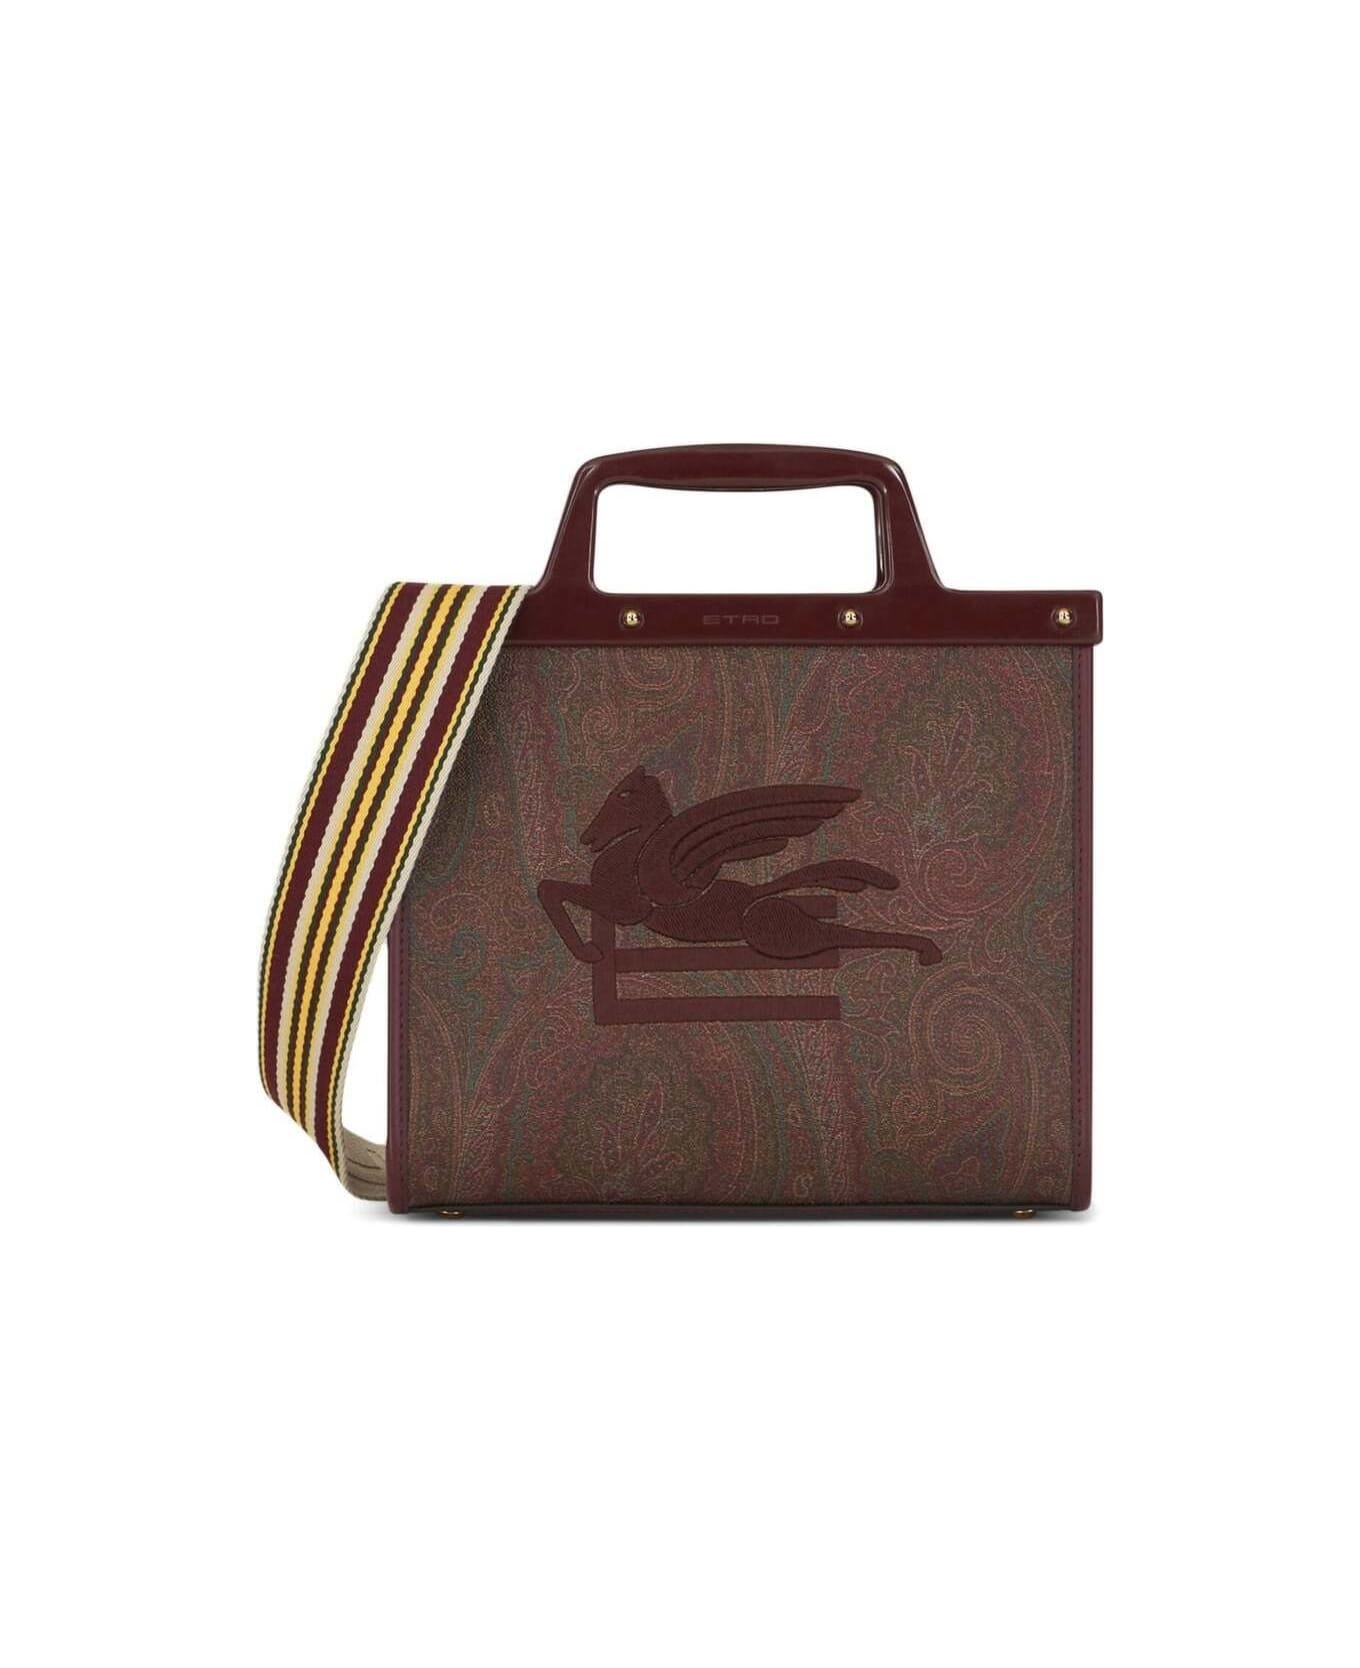 Etro 'love Trotter' Brown Shopper Bag With Ribbon Shoulder Strap And Embroidered Loo In Cotton Blend Woman - Brown